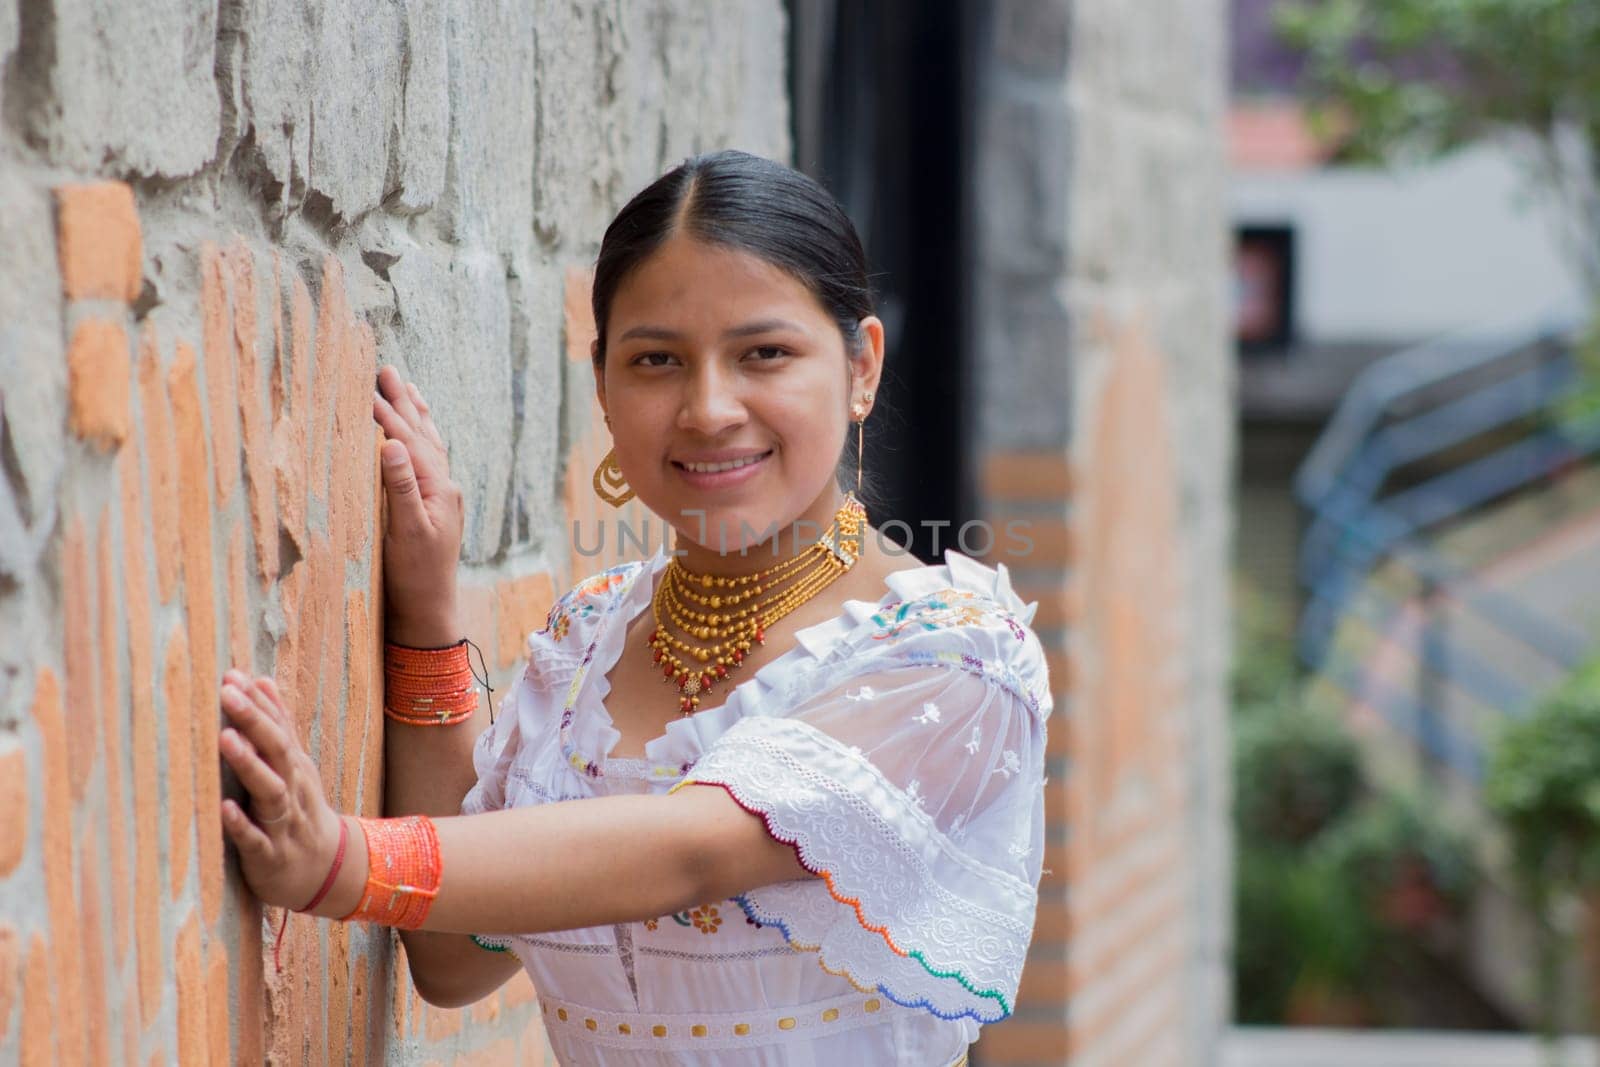 medium shot of empowered indigenous woman smiling and happy at camera in traditional dress by Raulmartin